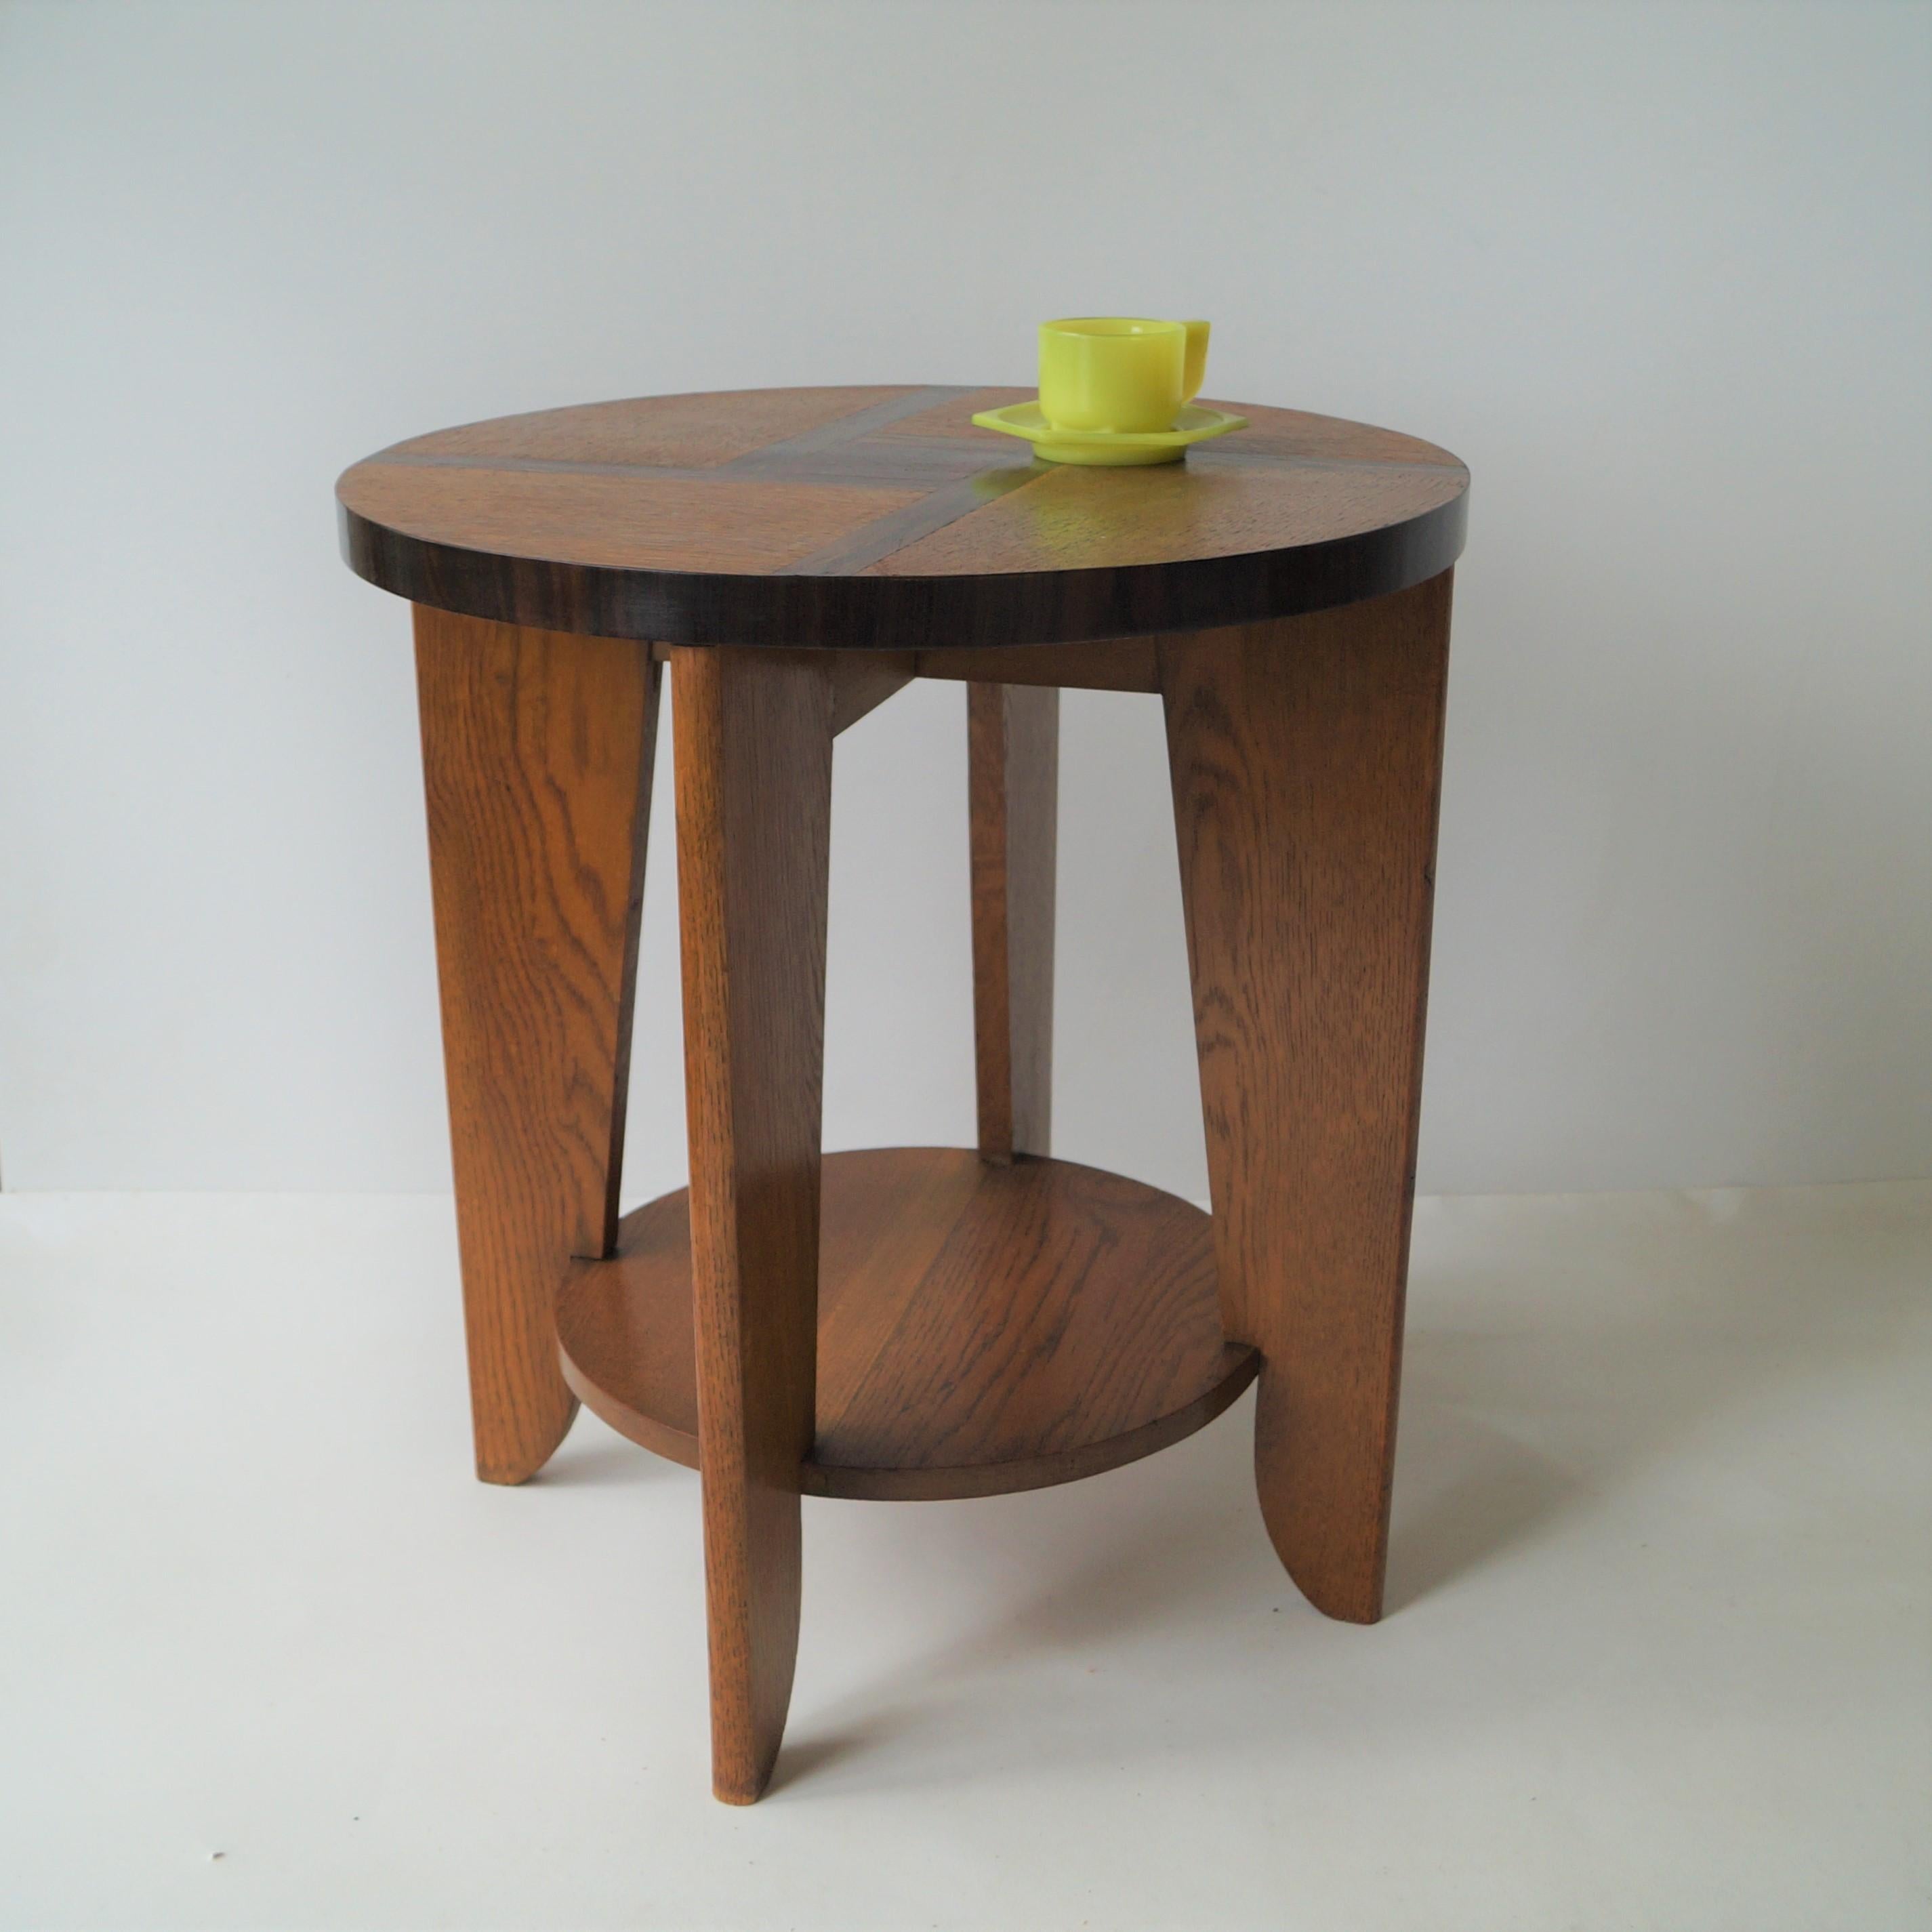 Dutch Art Deco Occasional Table Haagse School, 1930s For Sale 1